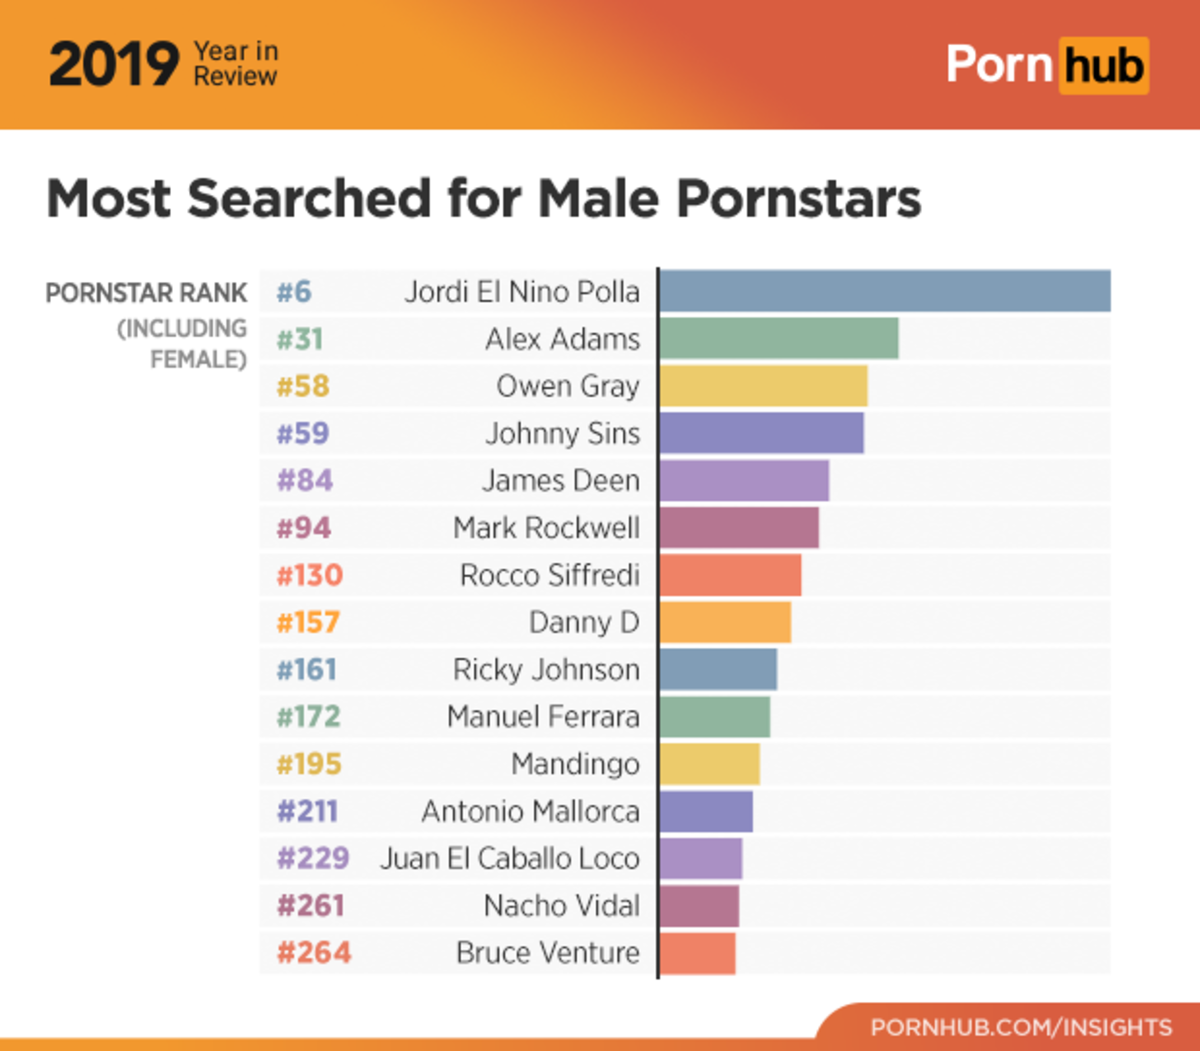 1-pornhub-insights-2019-review-year-most-male-porn-star-1